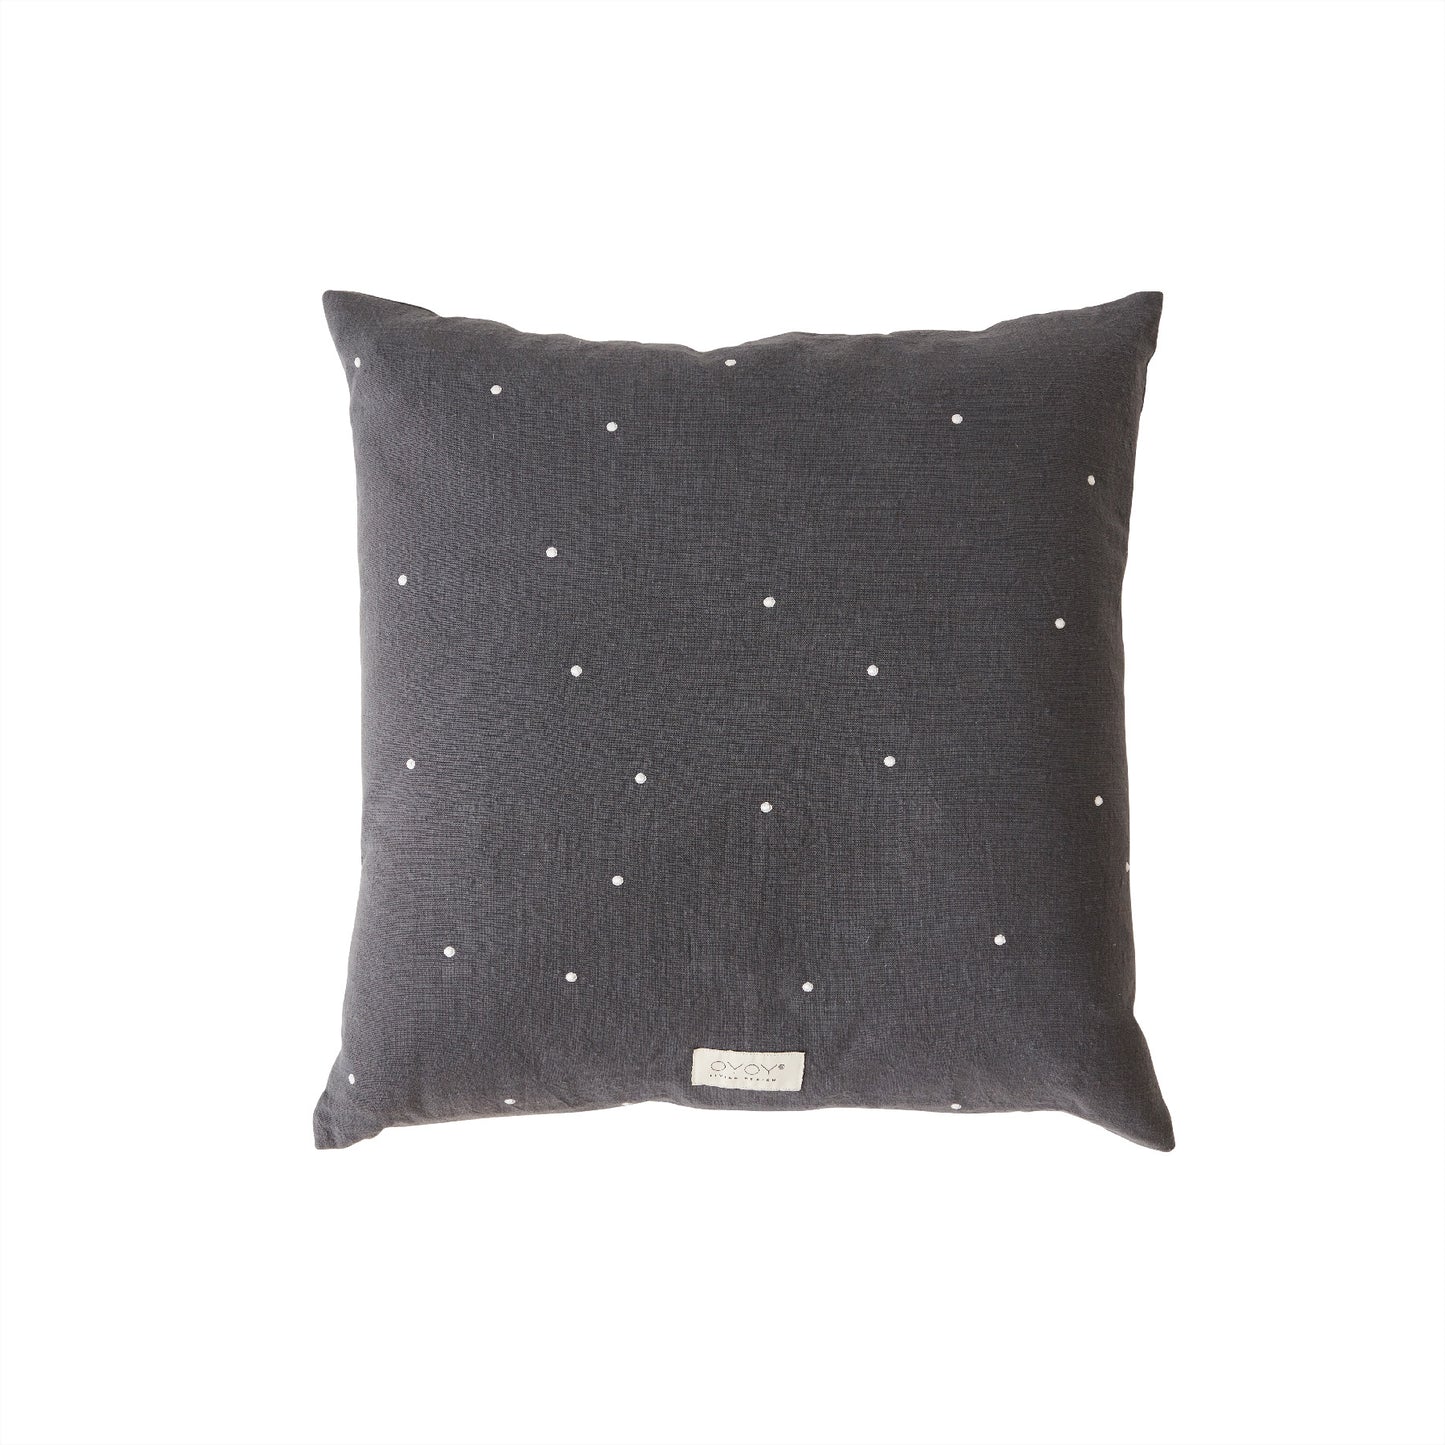 OYOY LIVING Kyoto Dot Cushion Cover Square Cushion Cover 201 Anthracite